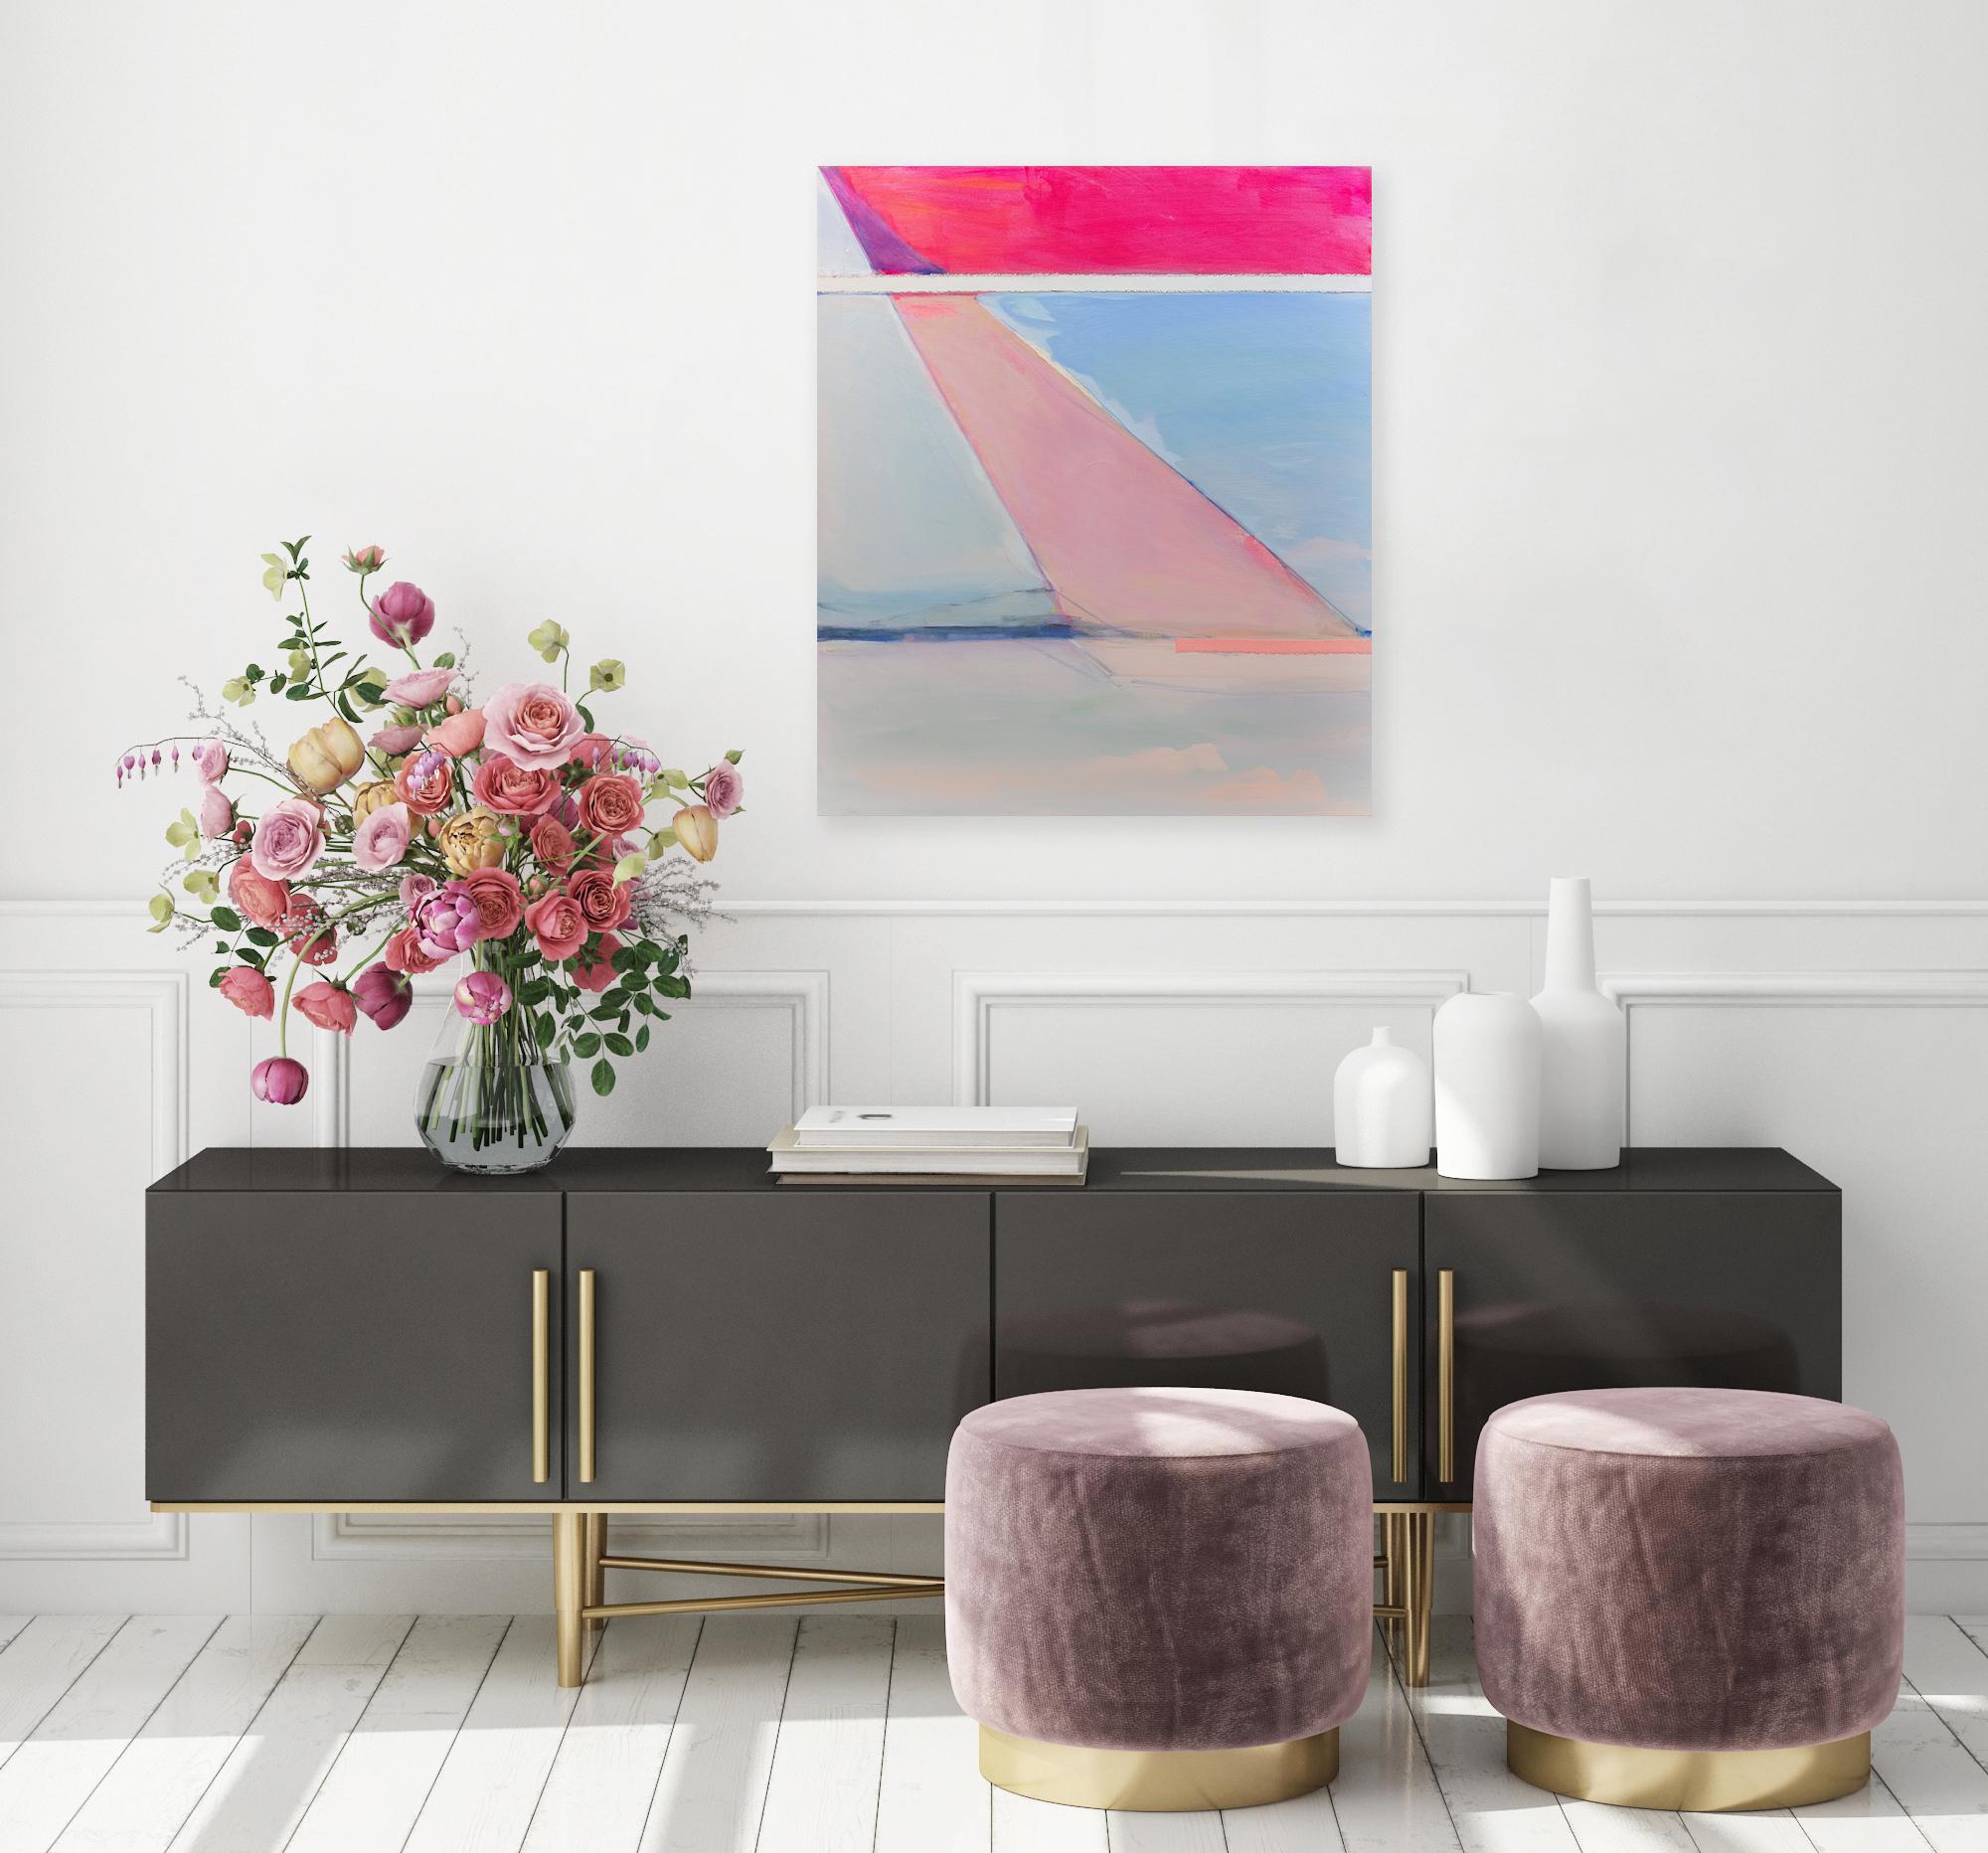 This abstract painting by Kelly Rossetti is made with acrylic paint and raw canvas pieces assembled on gallery wrapped canvas. It features a pink and blue palette with geometric lines, shapes, and marks layered over one another. The painting has